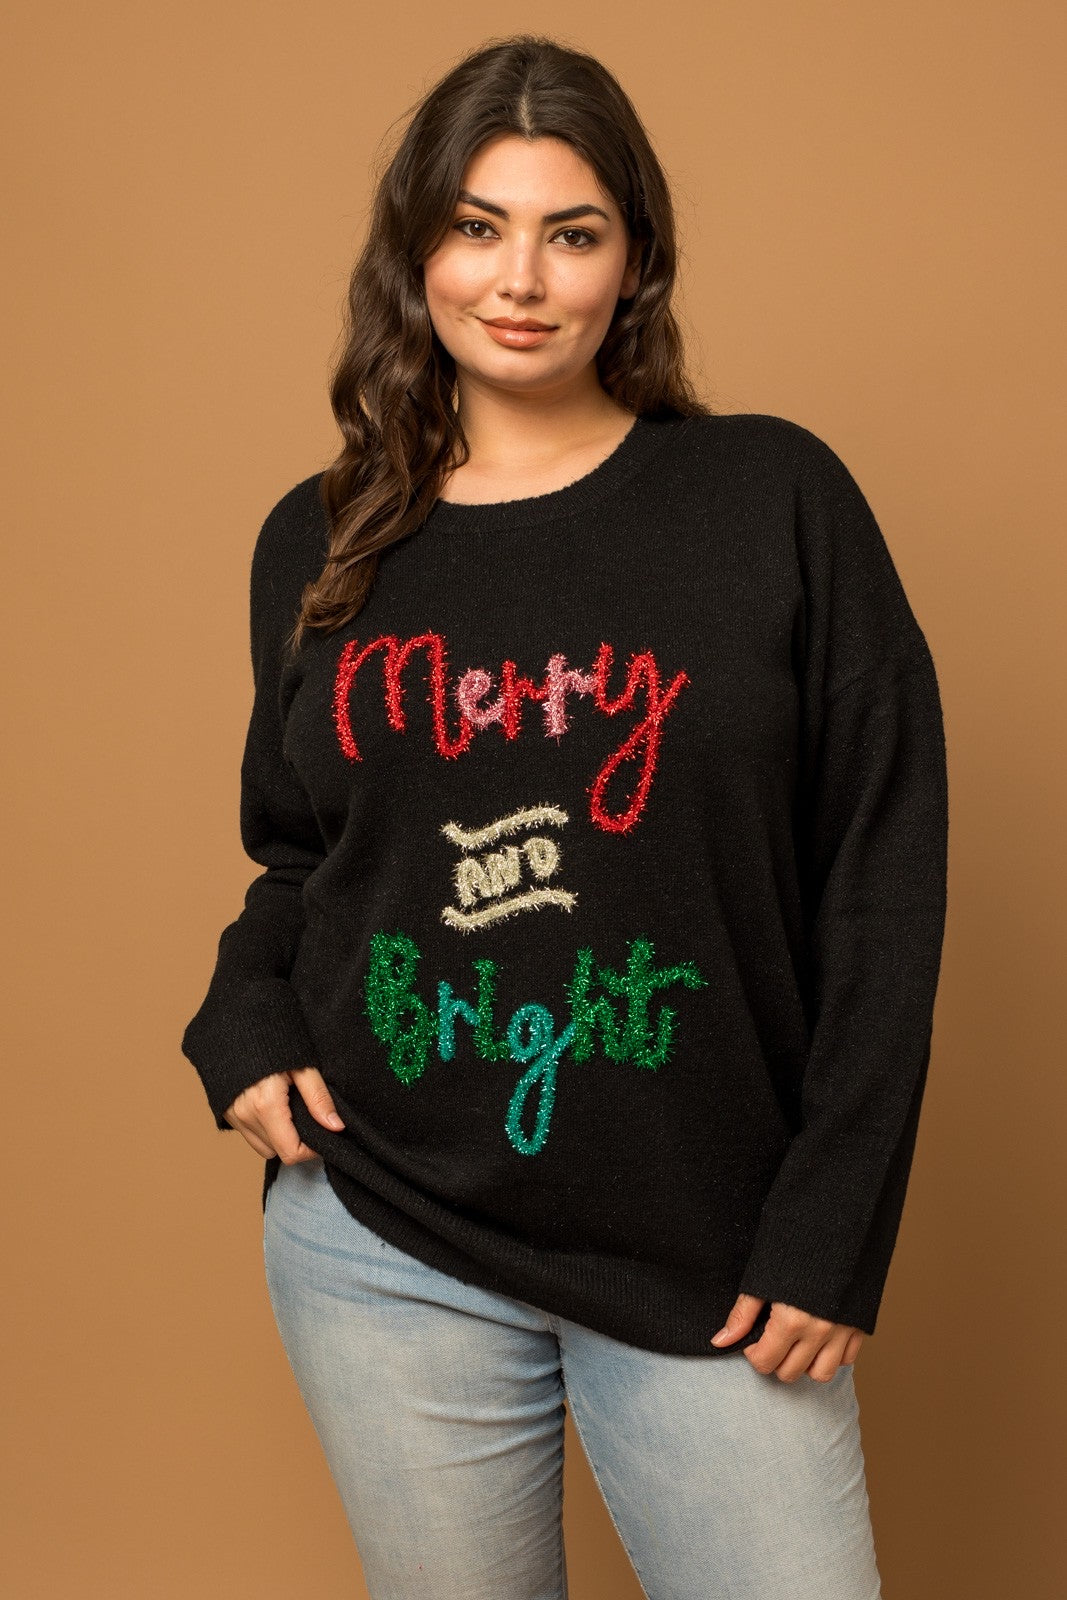 Merry and bright sparkly Christmas sweater